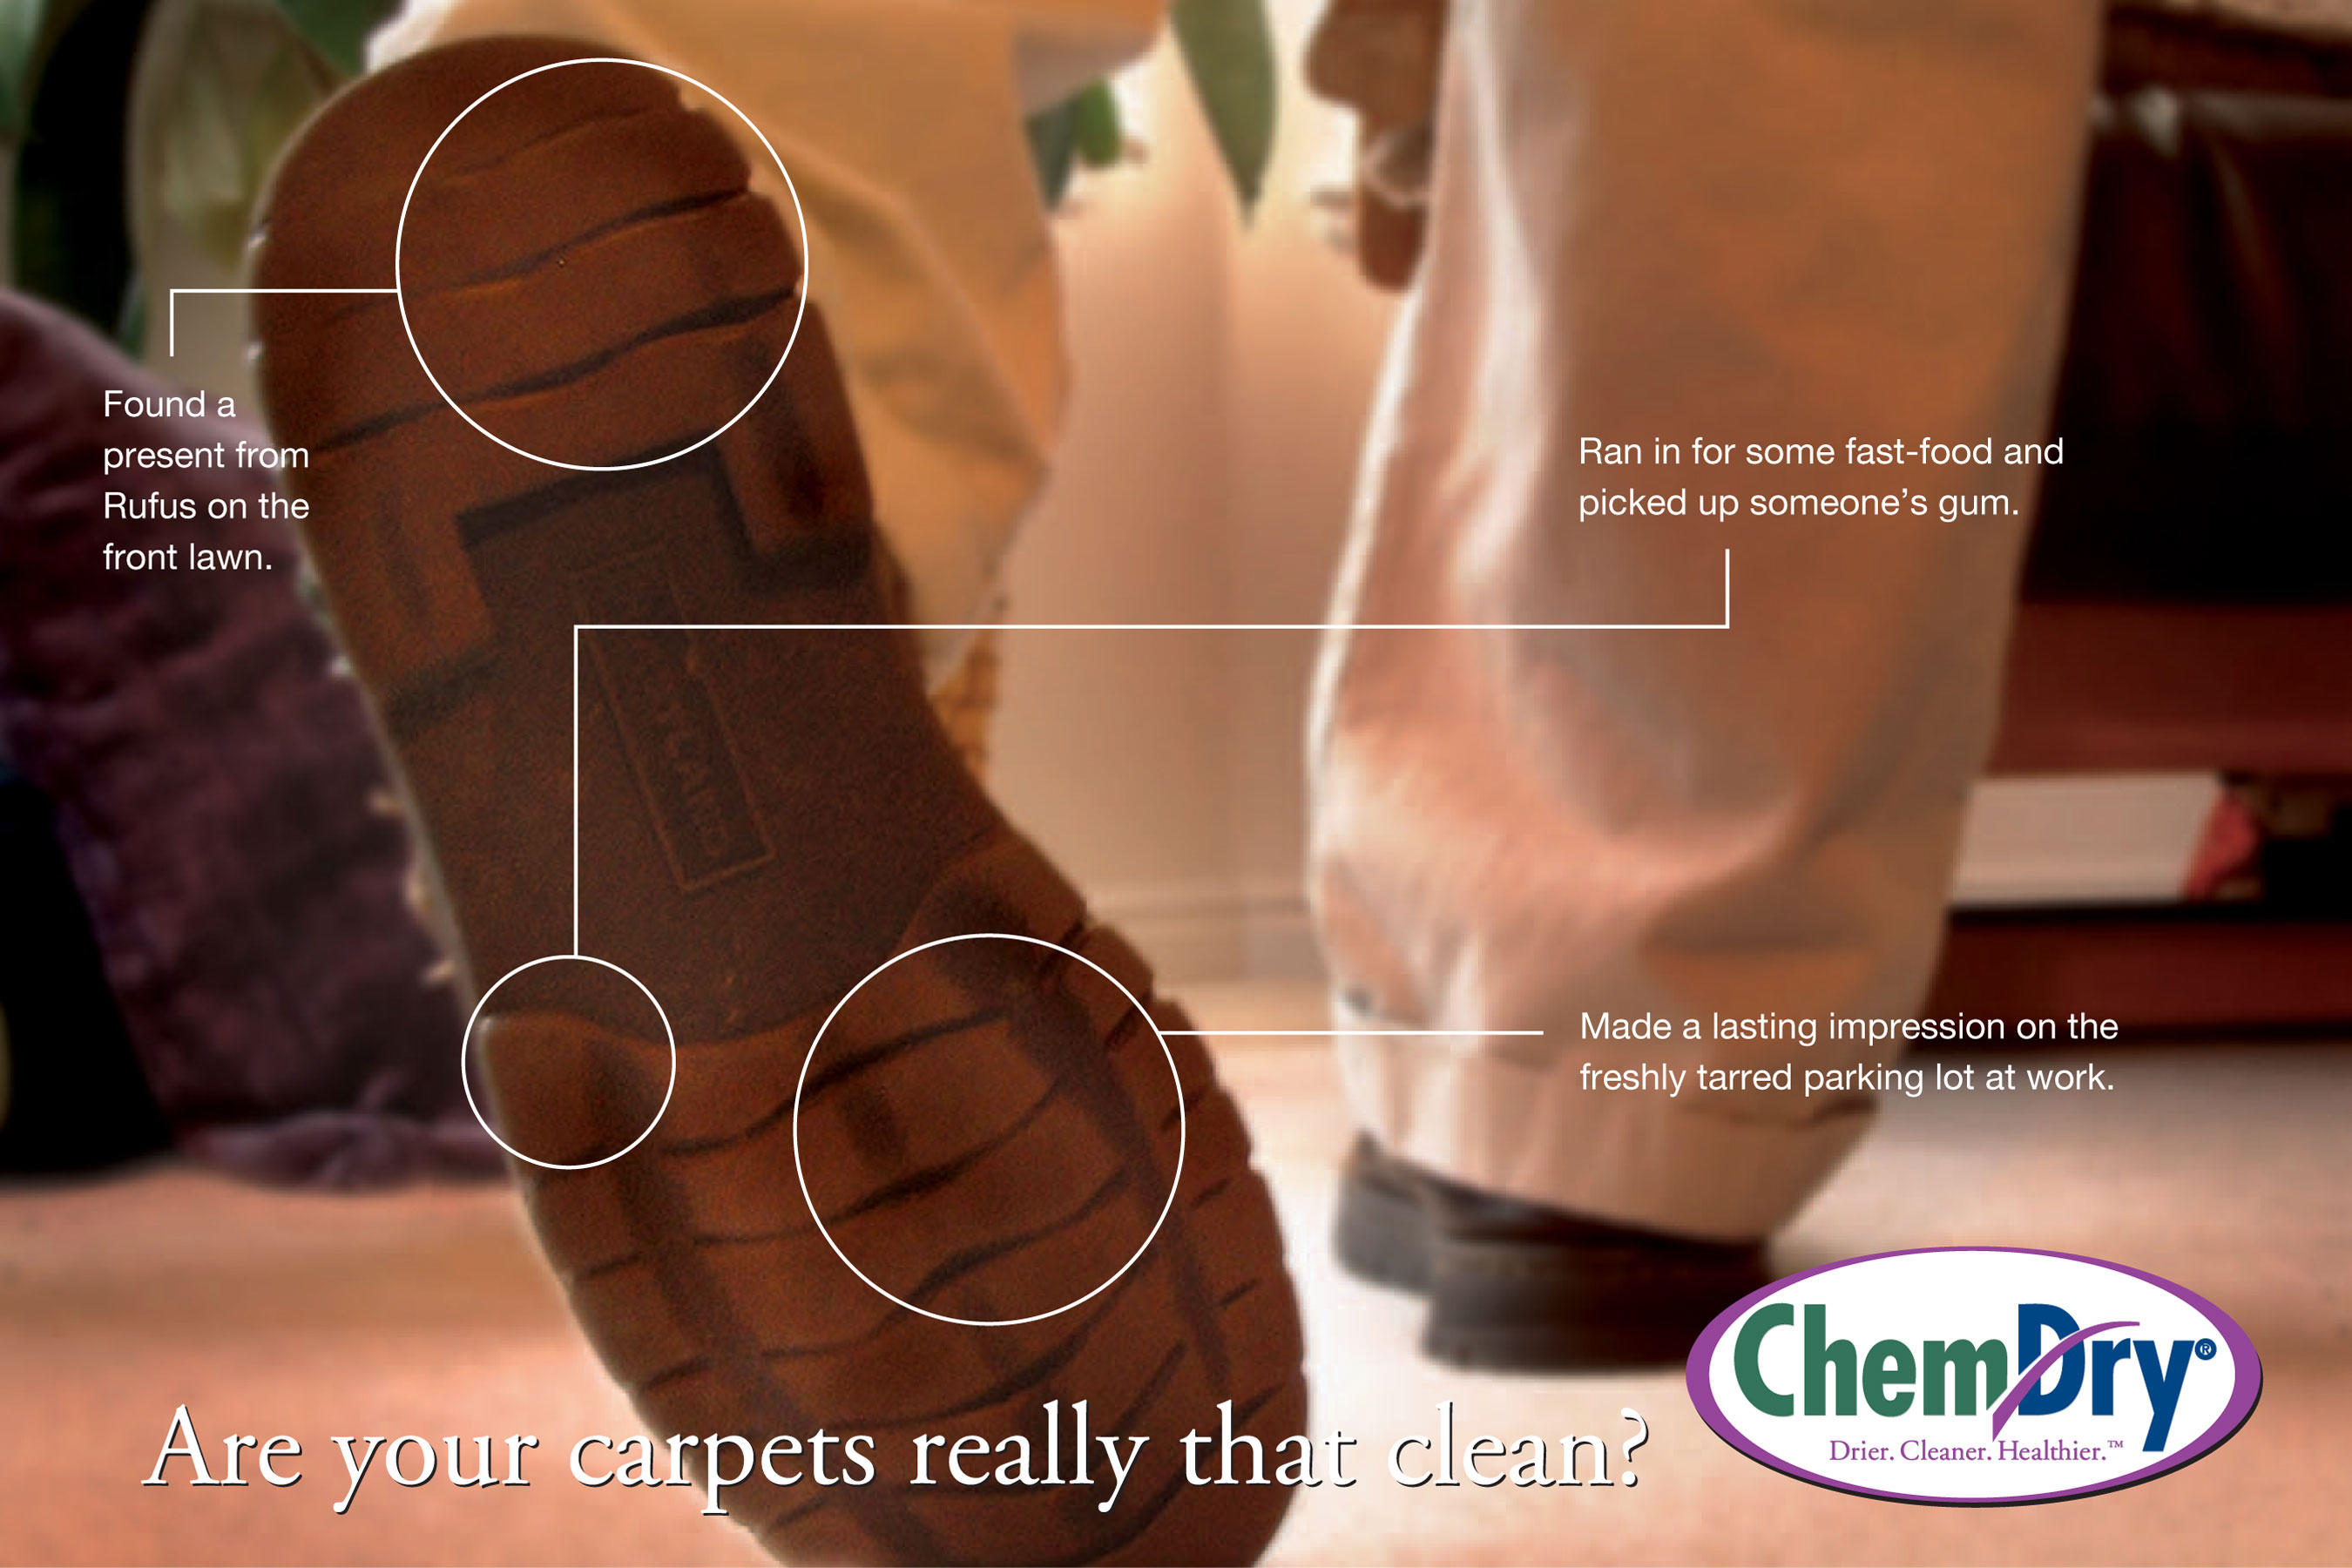 How clean are your carpets?